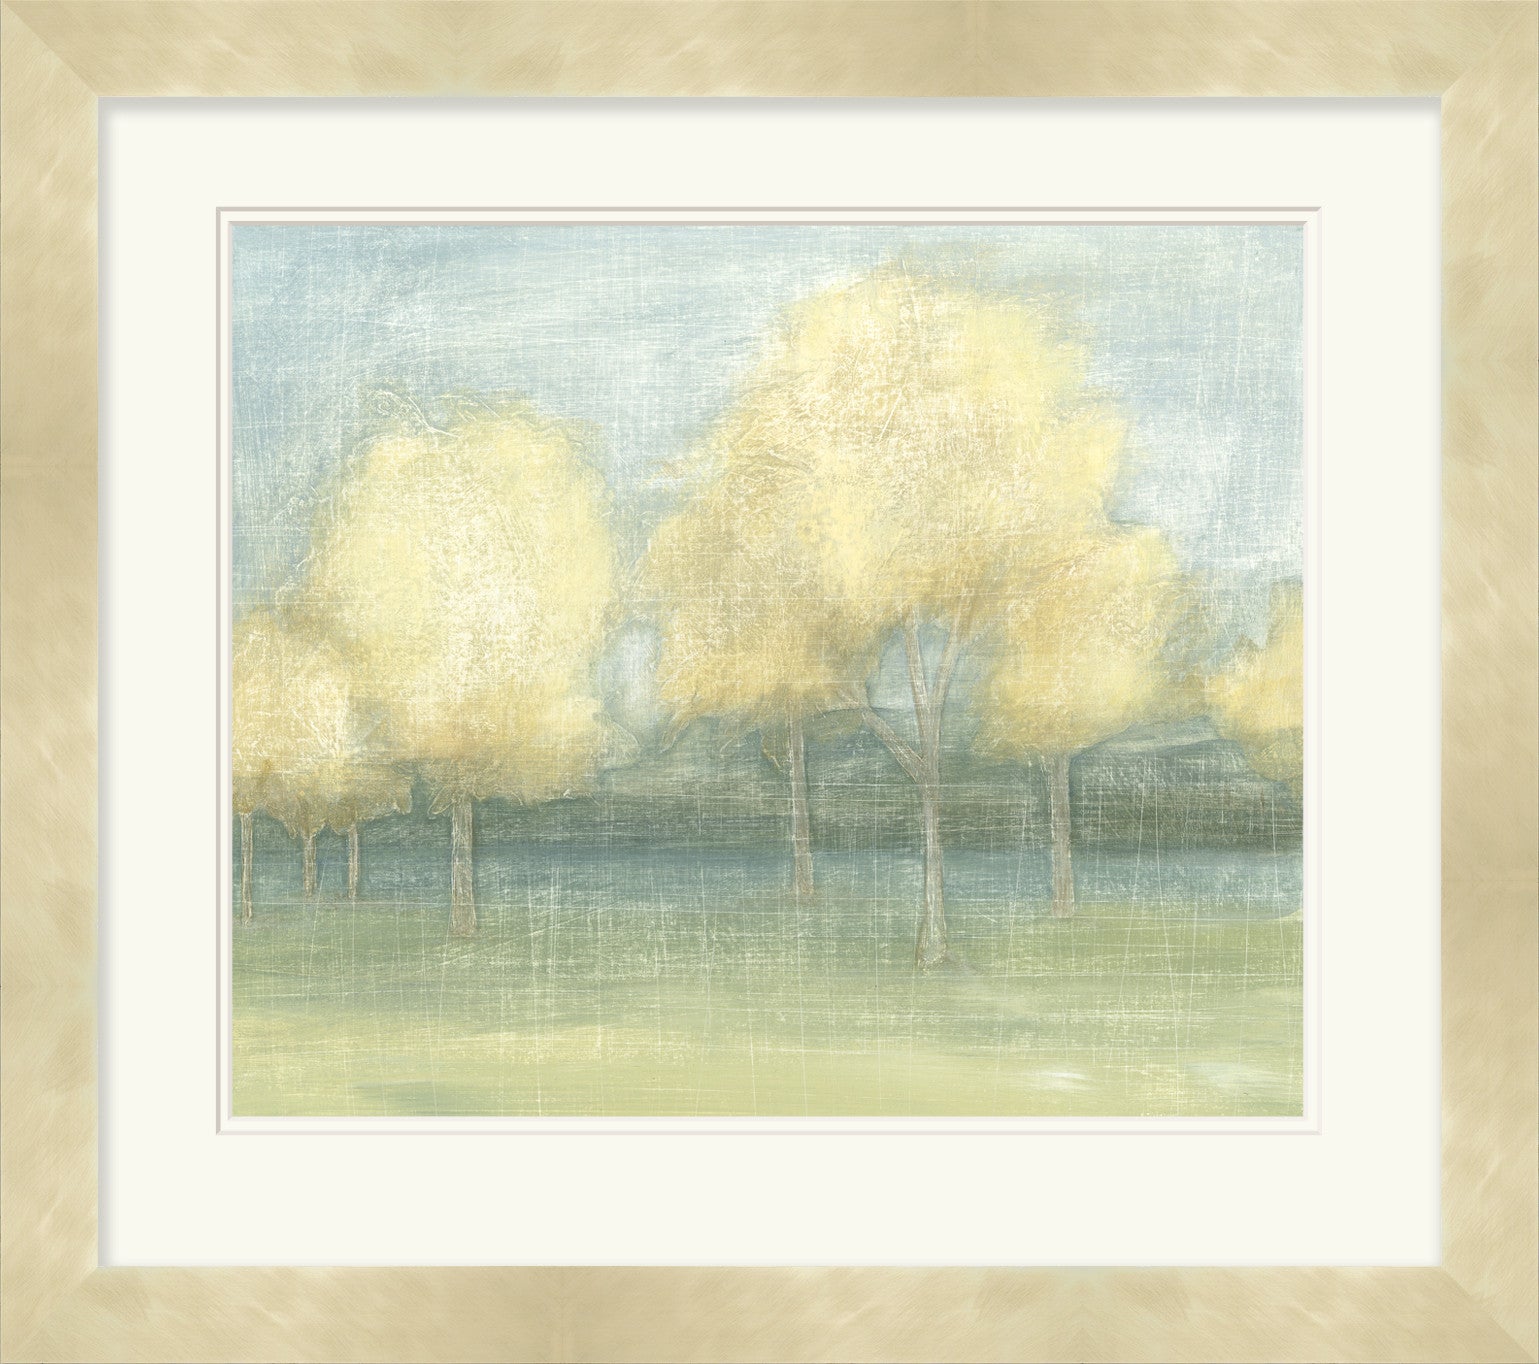 Surya Wall Decor LJ-4101 Pastel by Megan Meagher main image